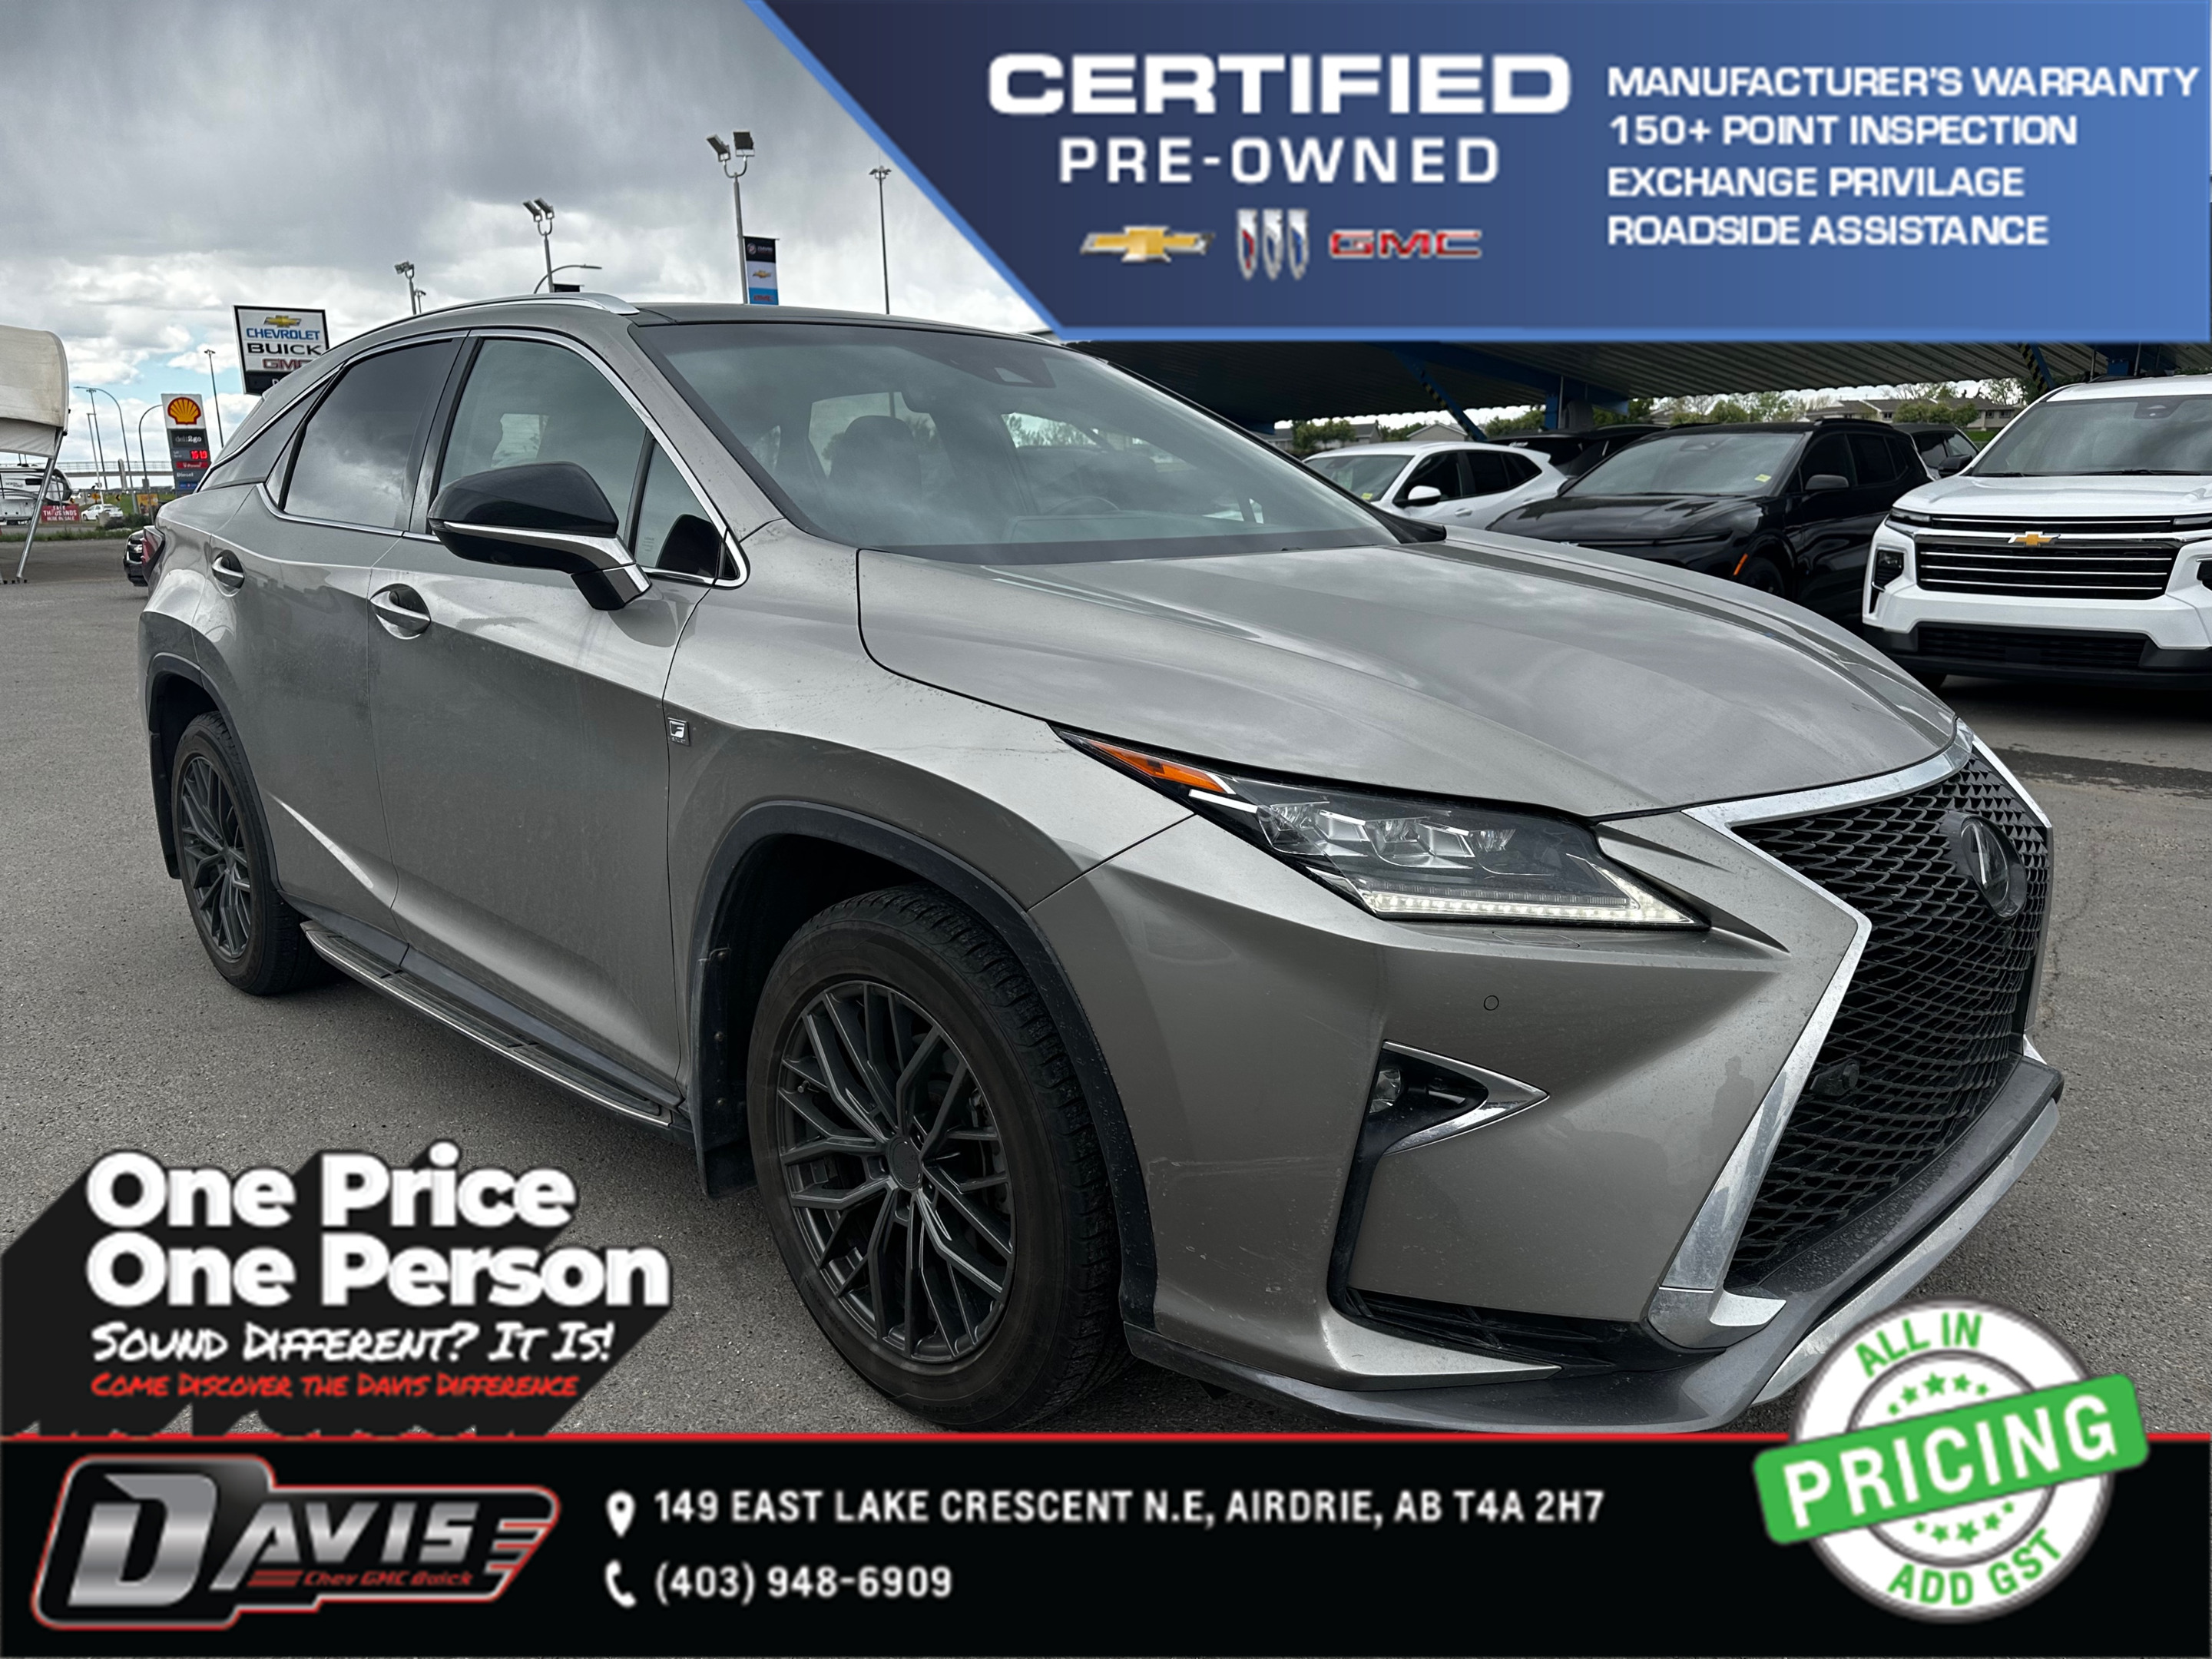 2018 Lexus RX 350 F SPORT | PANORAMIC ROOF | LOW MILEAGE | ONE OWNER